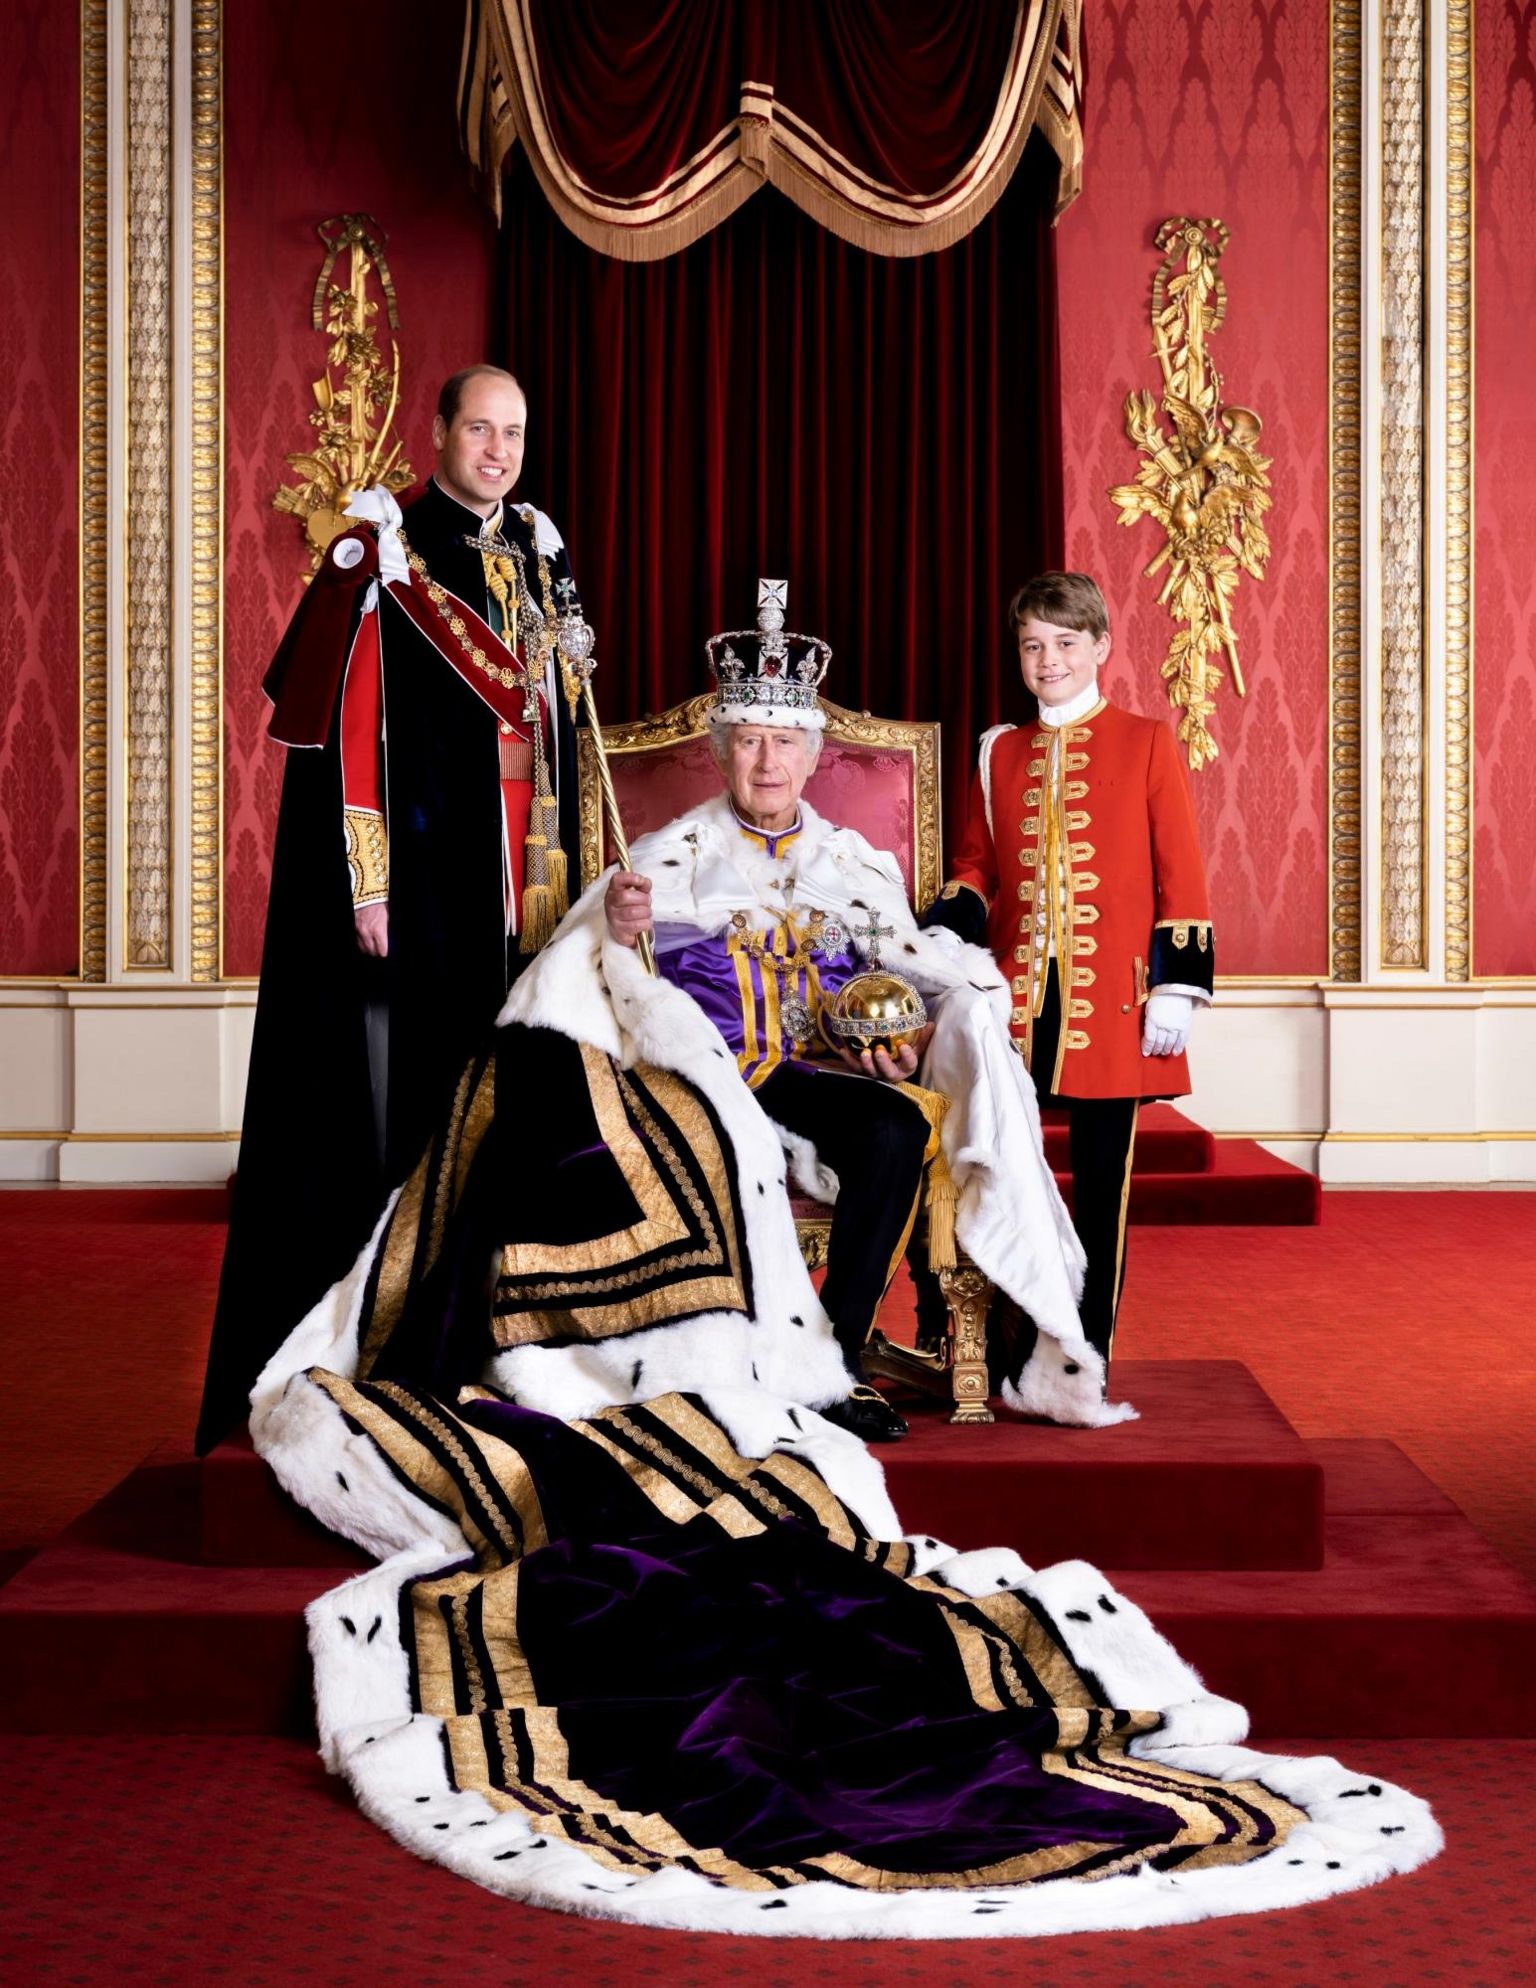 King Charles is pictured at Buckingham Palace seated on a throne - Prince William is on one side of him, and Prince George on the other